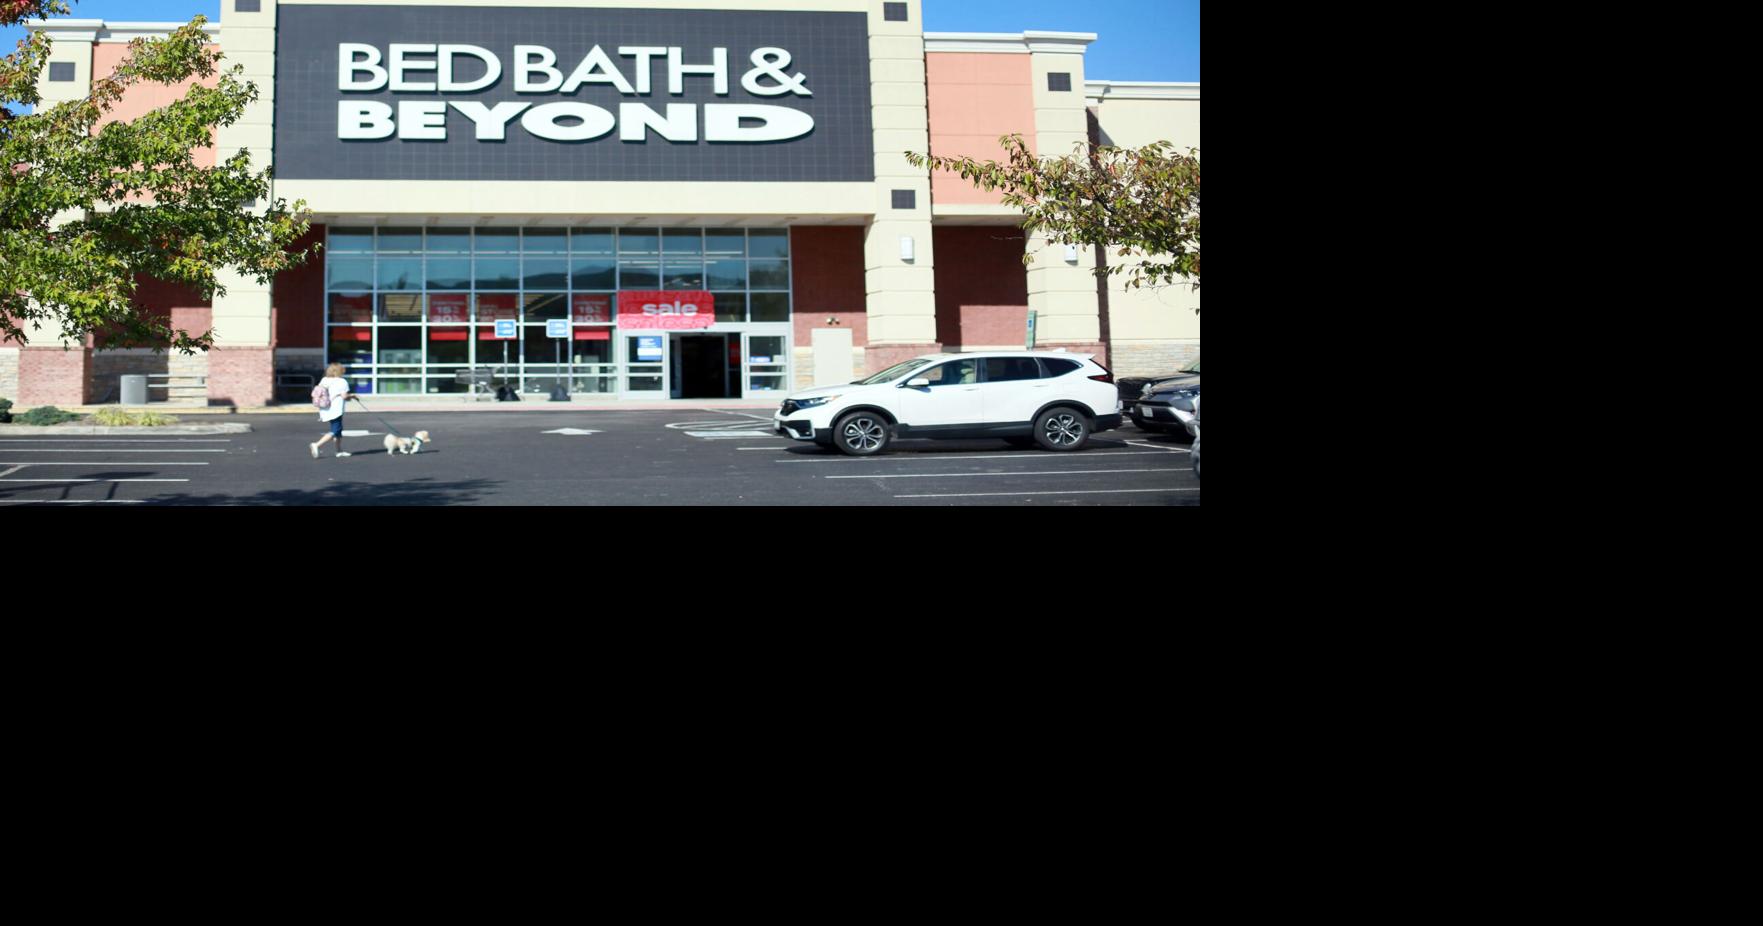 10 Bed, Bath & Beyond items to snag before the Bethlehem Township store  closes for good 